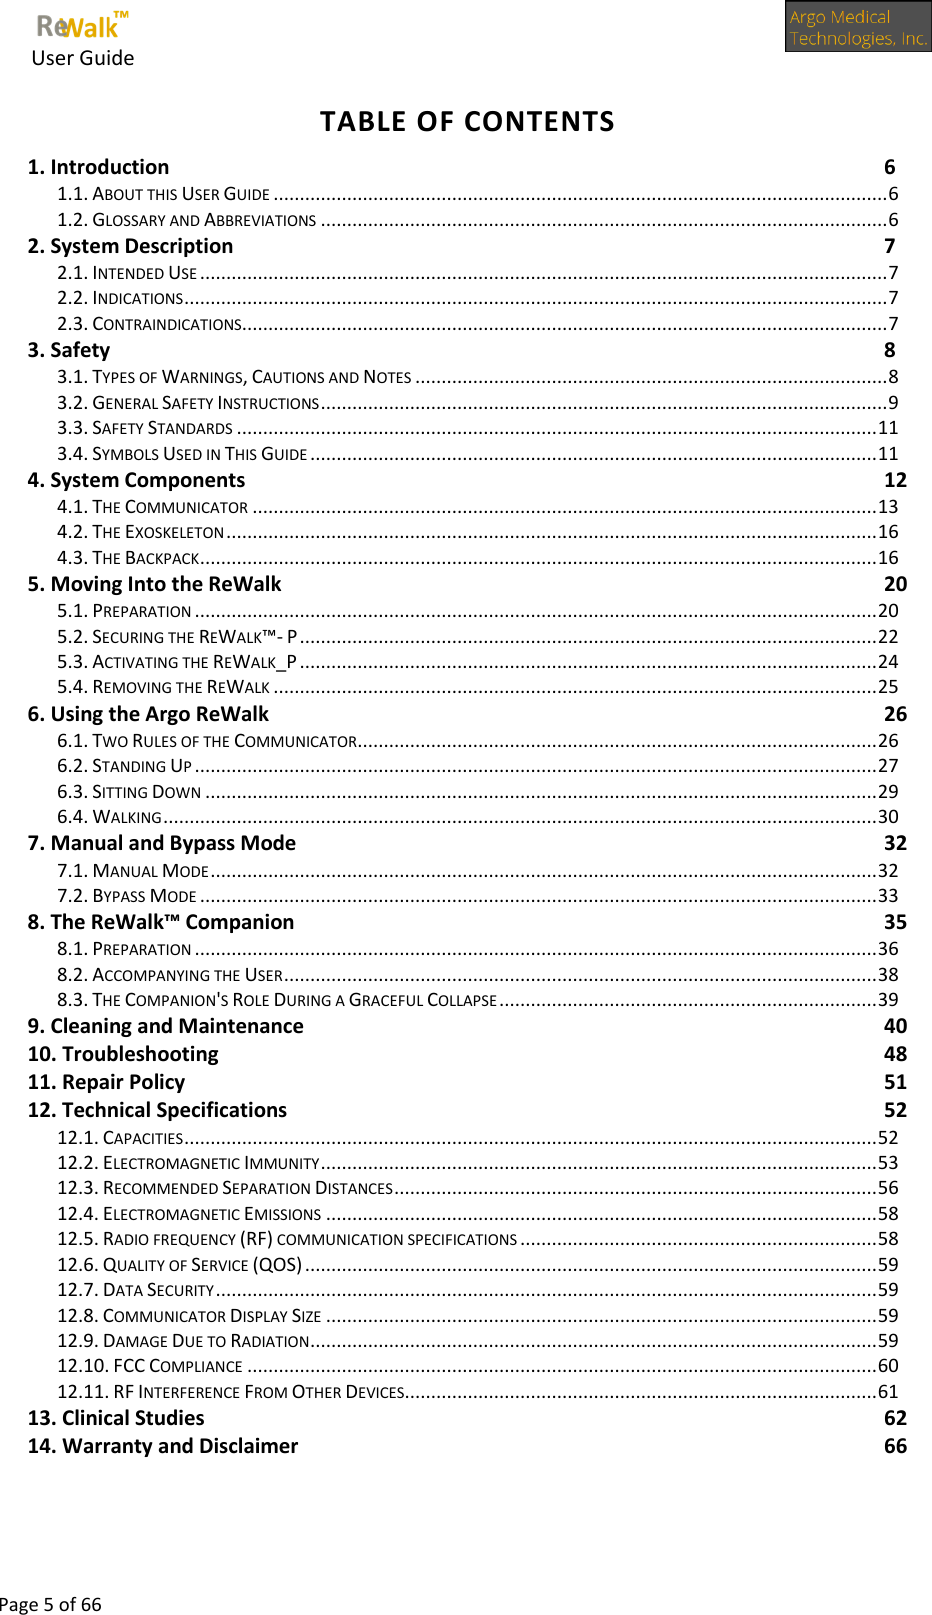     User Guide      Page 5 of 66  TABLE OF CONTENTS 1. Introduction  6 1.1. ABOUT THIS USER GUIDE ..................................................................................................................... 6 1.2. GLOSSARY AND ABBREVIATIONS ............................................................................................................ 6 2. System Description  7 2.1. INTENDED USE ................................................................................................................................... 7 2.2. INDICATIONS ...................................................................................................................................... 7 2.3. CONTRAINDICATIONS........................................................................................................................... 7 3. Safety  8 3.1. TYPES OF WARNINGS, CAUTIONS AND NOTES .......................................................................................... 8 3.2. GENERAL SAFETY INSTRUCTIONS ............................................................................................................ 9 3.3. SAFETY STANDARDS .......................................................................................................................... 11 3.4. SYMBOLS USED IN THIS GUIDE ............................................................................................................ 11 4. System Components  12 4.1. THE COMMUNICATOR ....................................................................................................................... 13 4.2. THE EXOSKELETON ............................................................................................................................ 16 4.3. THE BACKPACK ................................................................................................................................. 16 5. Moving Into the ReWalk  20 5.1. PREPARATION .................................................................................................................................. 20 5.2. SECURING THE REWALK™- P .............................................................................................................. 22 5.3. ACTIVATING THE REWALK_P .............................................................................................................. 24 5.4. REMOVING THE REWALK ................................................................................................................... 25 6. Using the Argo ReWalk  26 6.1. TWO RULES OF THE COMMUNICATOR ................................................................................................... 26 6.2. STANDING UP .................................................................................................................................. 27 6.3. SITTING DOWN ................................................................................................................................ 29 6.4. WALKING ........................................................................................................................................ 30 7. Manual and Bypass Mode  32 7.1. MANUAL MODE ............................................................................................................................... 32 7.2. BYPASS MODE ................................................................................................................................. 33 8. The ReWalk™ Companion 35 8.1. PREPARATION .................................................................................................................................. 36 8.2. ACCOMPANYING THE USER ................................................................................................................. 38 8.3. THE COMPANION&apos;S ROLE DURING A GRACEFUL COLLAPSE ........................................................................ 39 9. Cleaning and Maintenance  40 10. Troubleshooting  48 11. Repair Policy  51 12. Technical Specifications  52 12.1. CAPACITIES .................................................................................................................................... 52 12.2. ELECTROMAGNETIC IMMUNITY .......................................................................................................... 53 12.3. RECOMMENDED SEPARATION DISTANCES ............................................................................................ 56 12.4. ELECTROMAGNETIC EMISSIONS ......................................................................................................... 58 12.5. RADIO FREQUENCY (RF) COMMUNICATION SPECIFICATIONS .................................................................... 58 12.6. QUALITY OF SERVICE (QOS) ............................................................................................................. 59 12.7. DATA SECURITY .............................................................................................................................. 59 12.8. COMMUNICATOR DISPLAY SIZE ......................................................................................................... 59 12.9. DAMAGE DUE TO RADIATION ............................................................................................................ 59 12.10. FCC COMPLIANCE ........................................................................................................................ 60 12.11. RF INTERFERENCE FROM OTHER DEVICES .......................................................................................... 61 13. Clinical Studies  62 14. Warranty and Disclaimer  66 